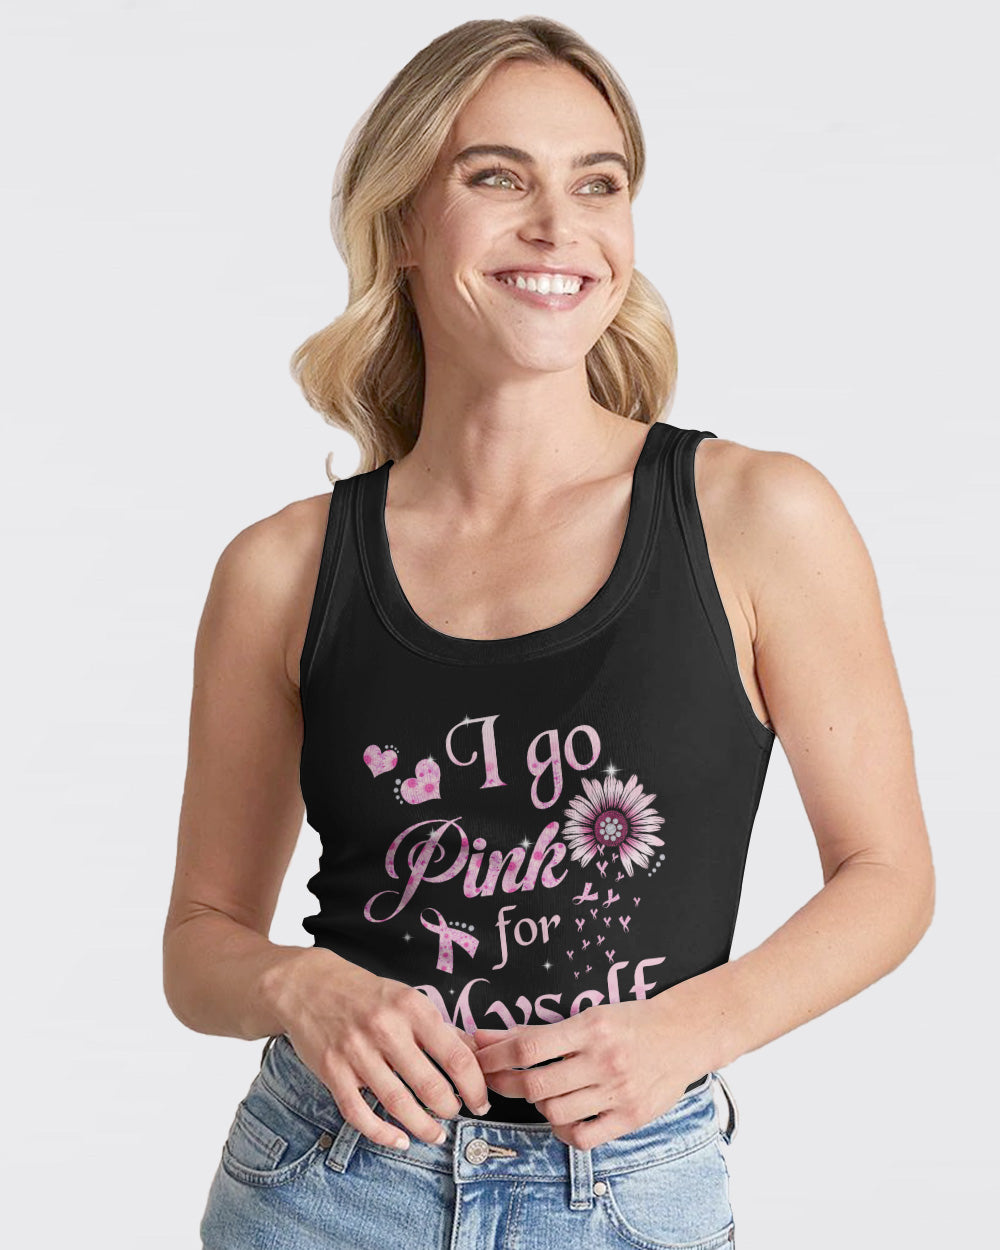 Never Give Up Pink Wings Daisy Women's Breast Cancer Awareness Tanks